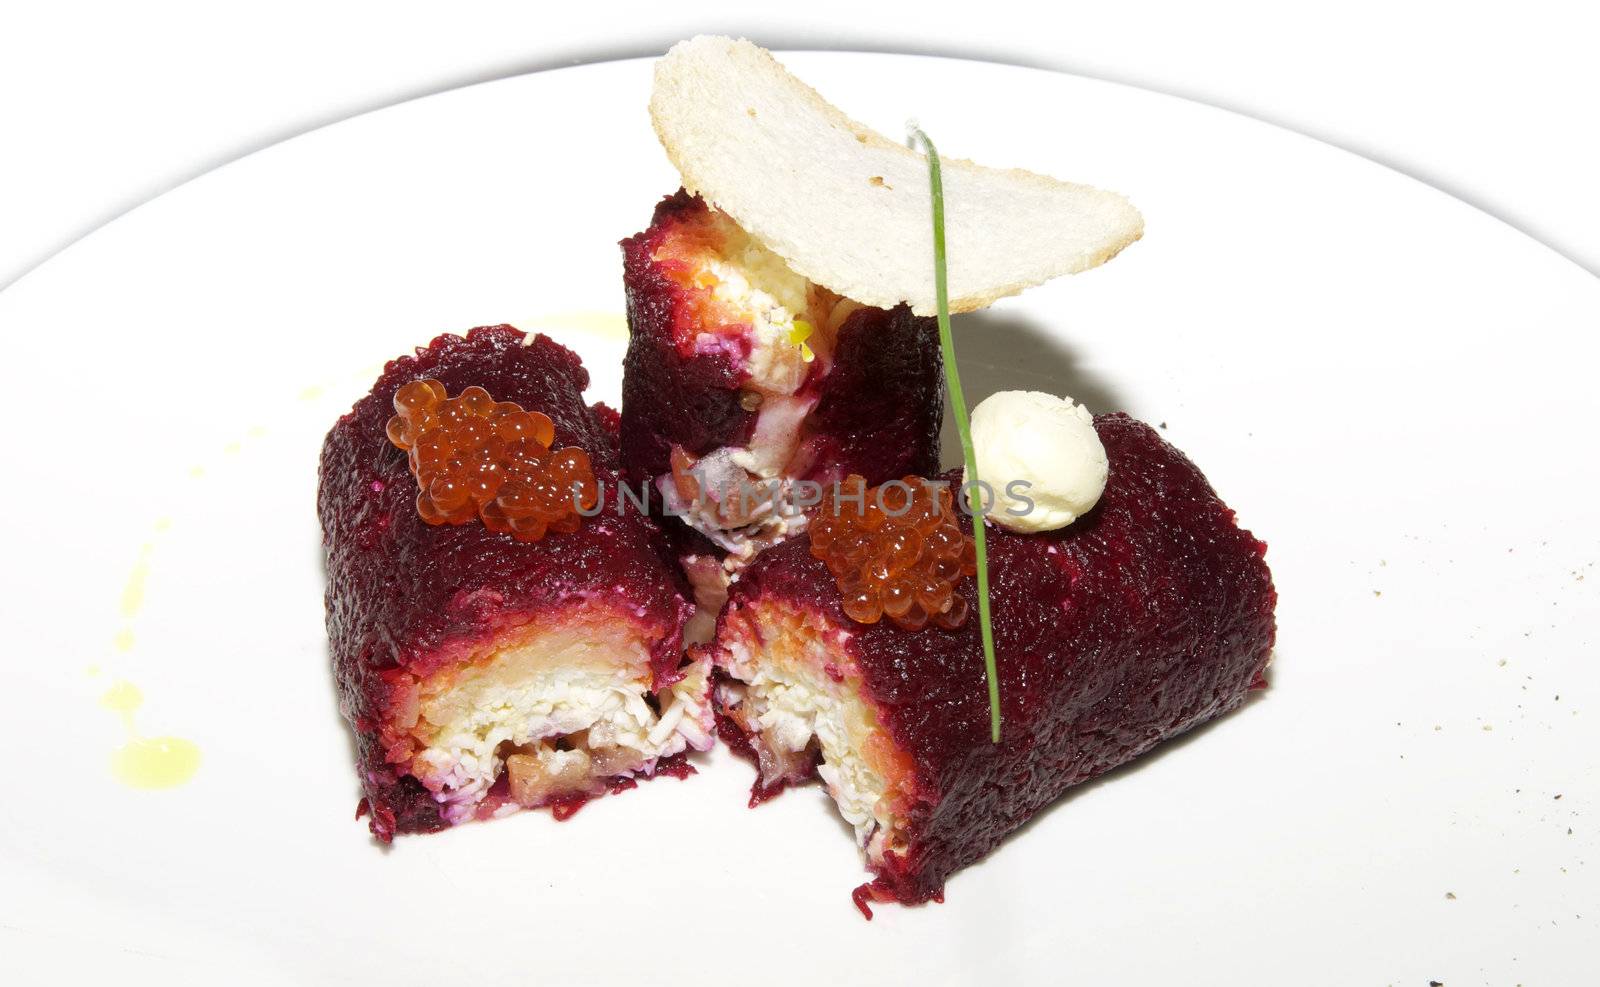 beet rolls with caviar by Lester120